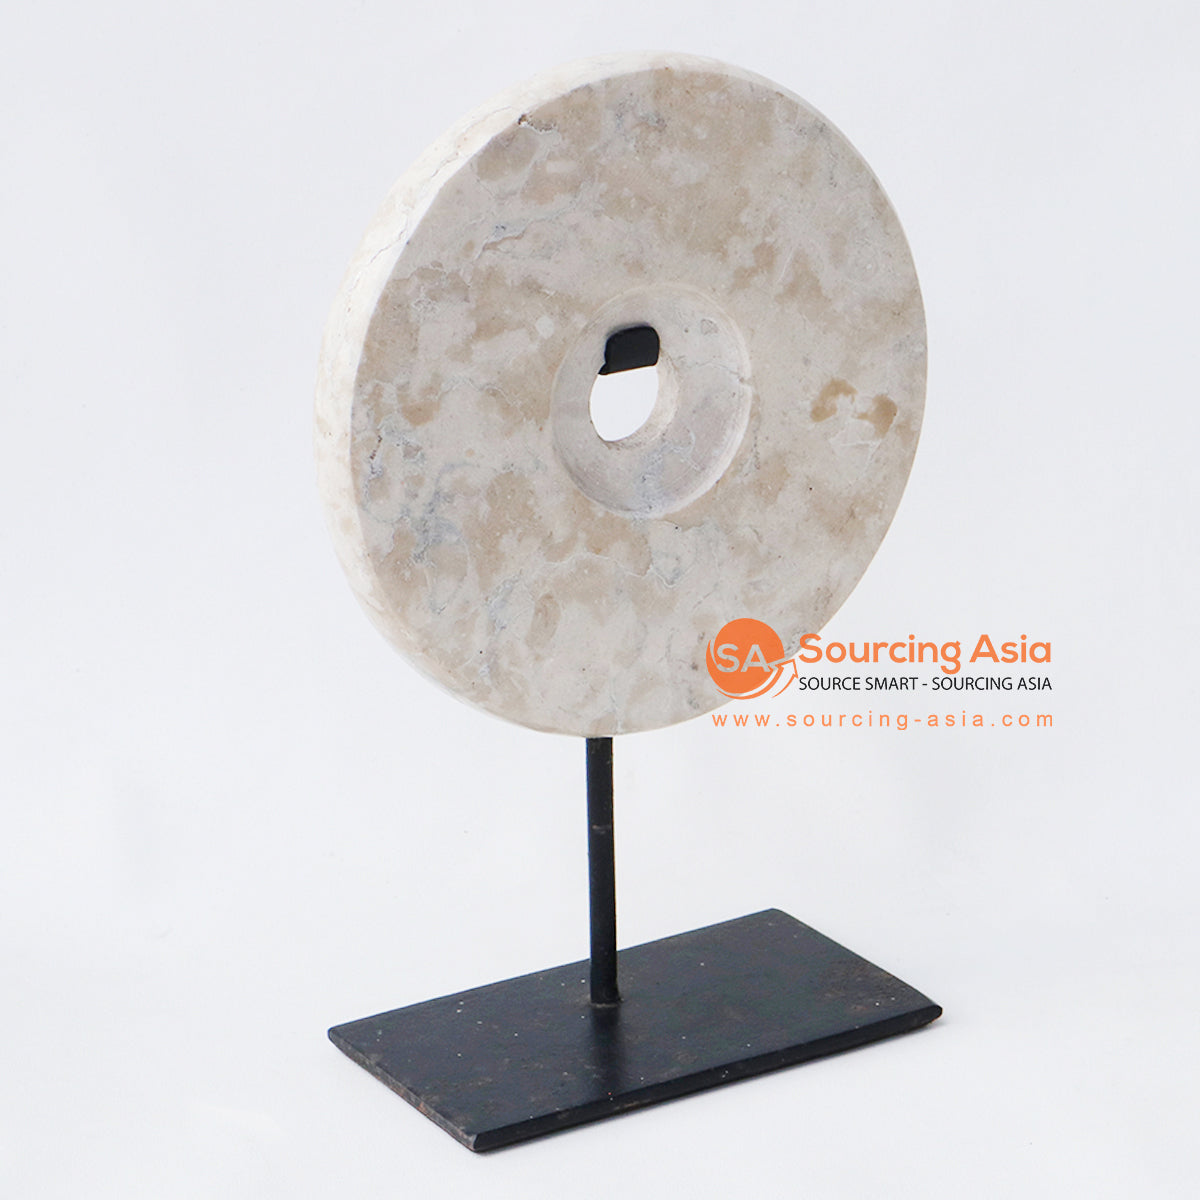 KNTC031 WHITE STONE DISC ON STAND DECORATION